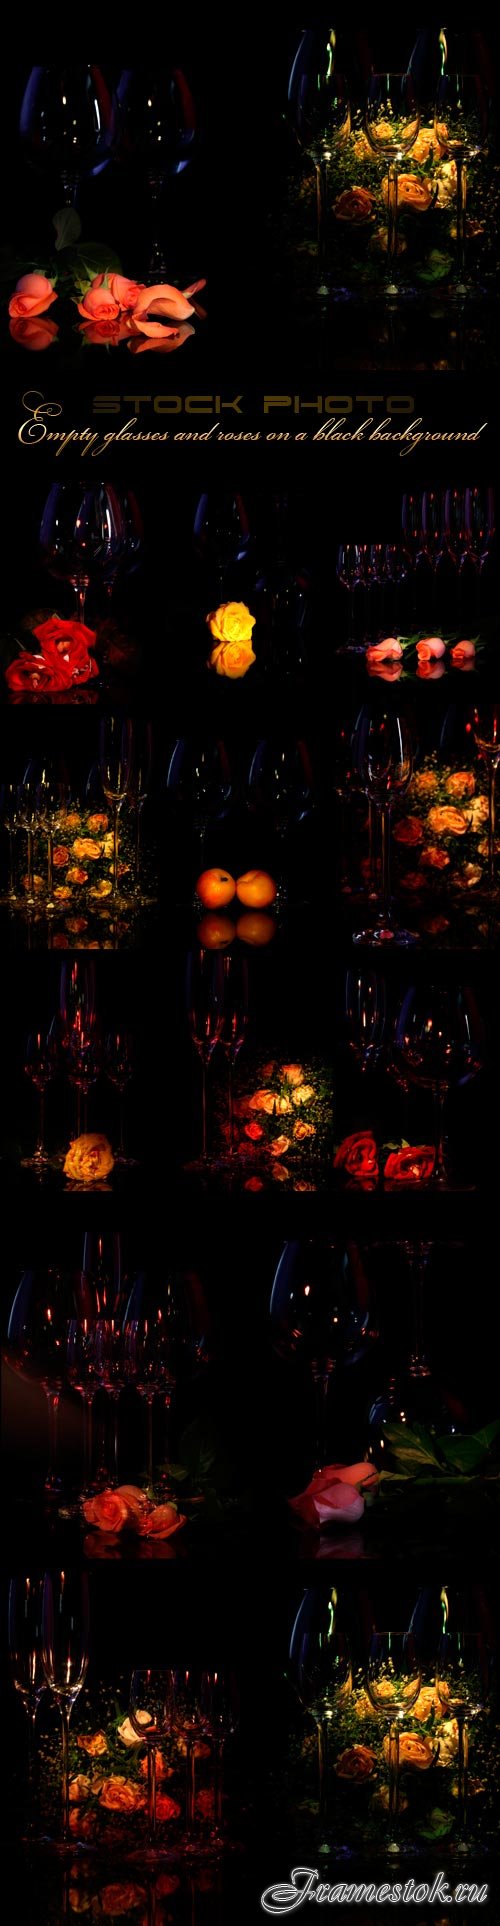 Empty glasses and roses on a black background